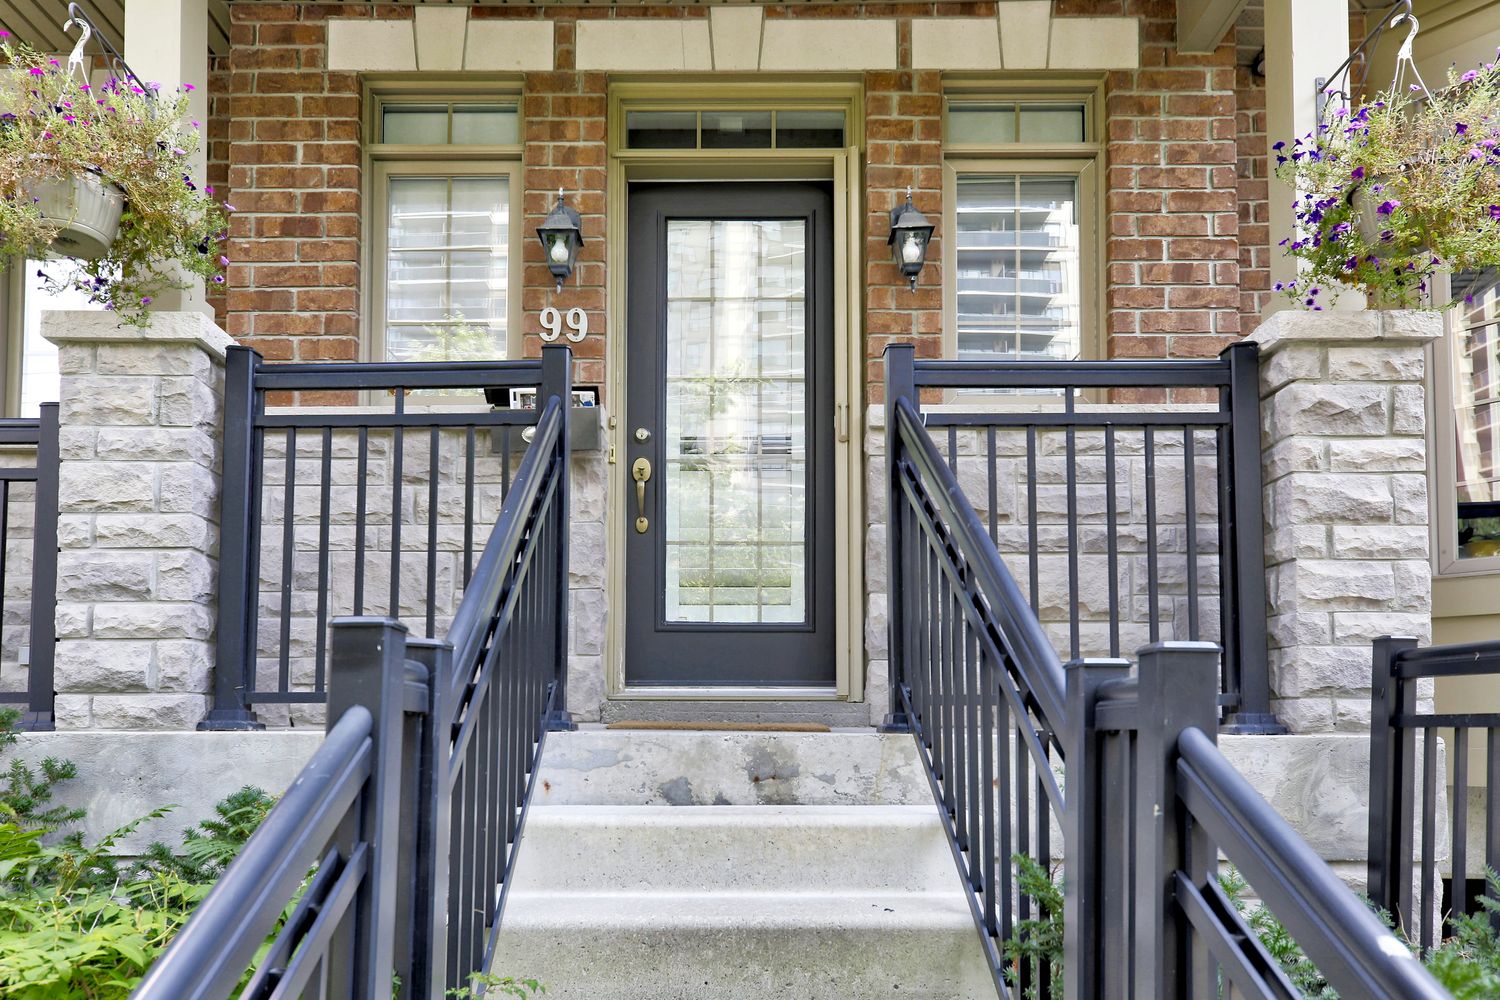 83-99 Erskine Avenue. Erskine Avenue Townhouses is located in  Midtown, Toronto - image #4 of 4